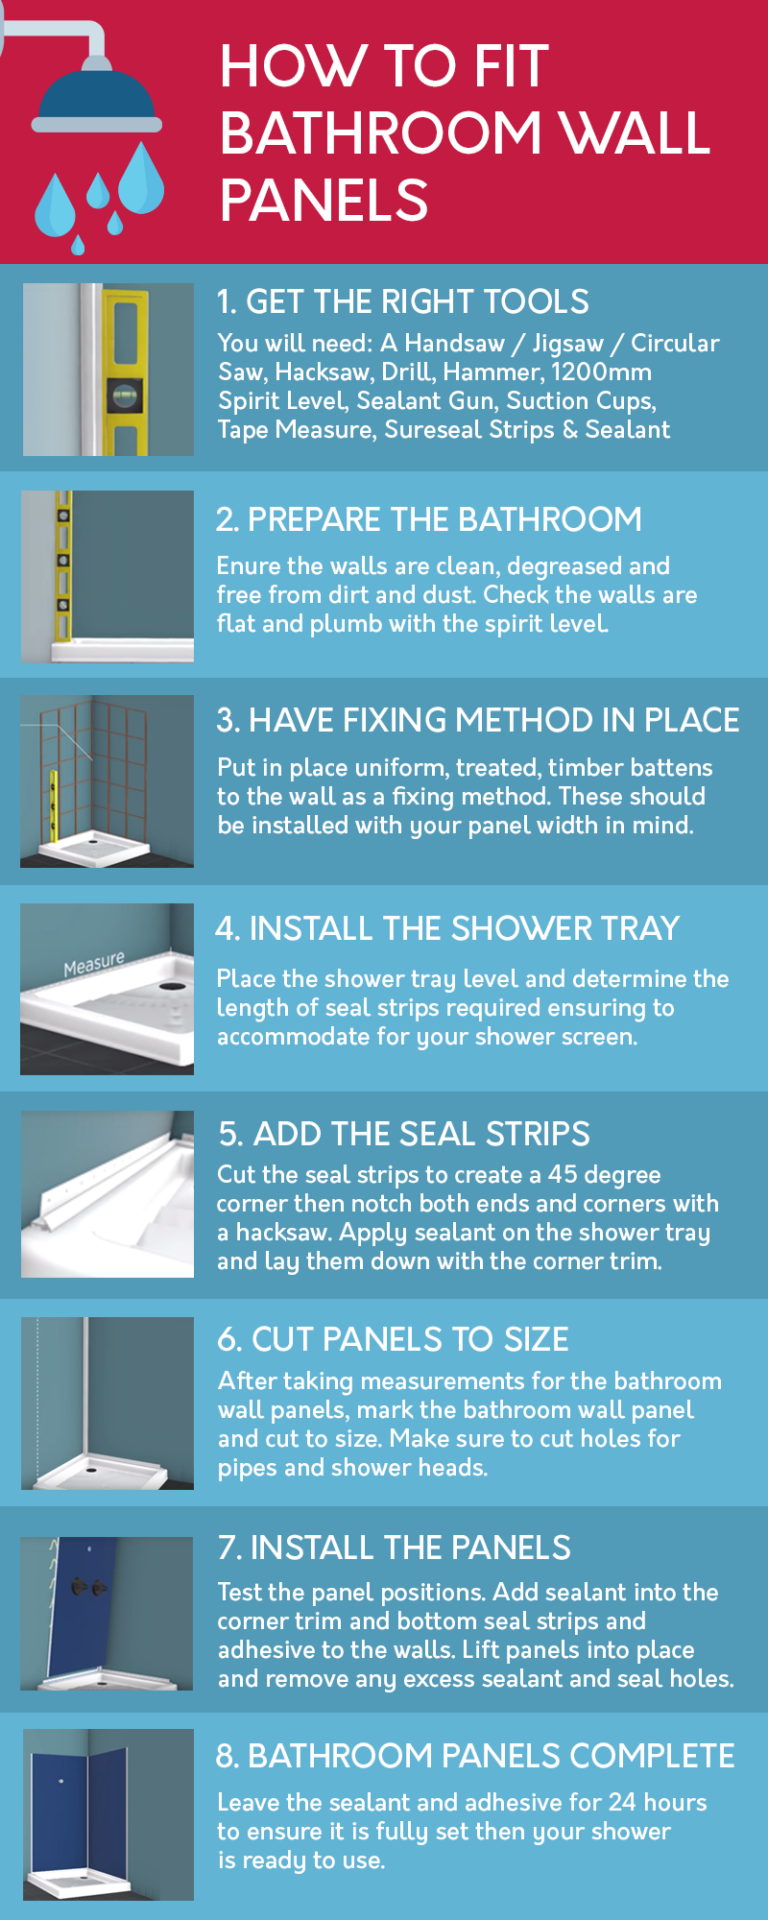 How To Cut Paneling: Step-by-Step Guide